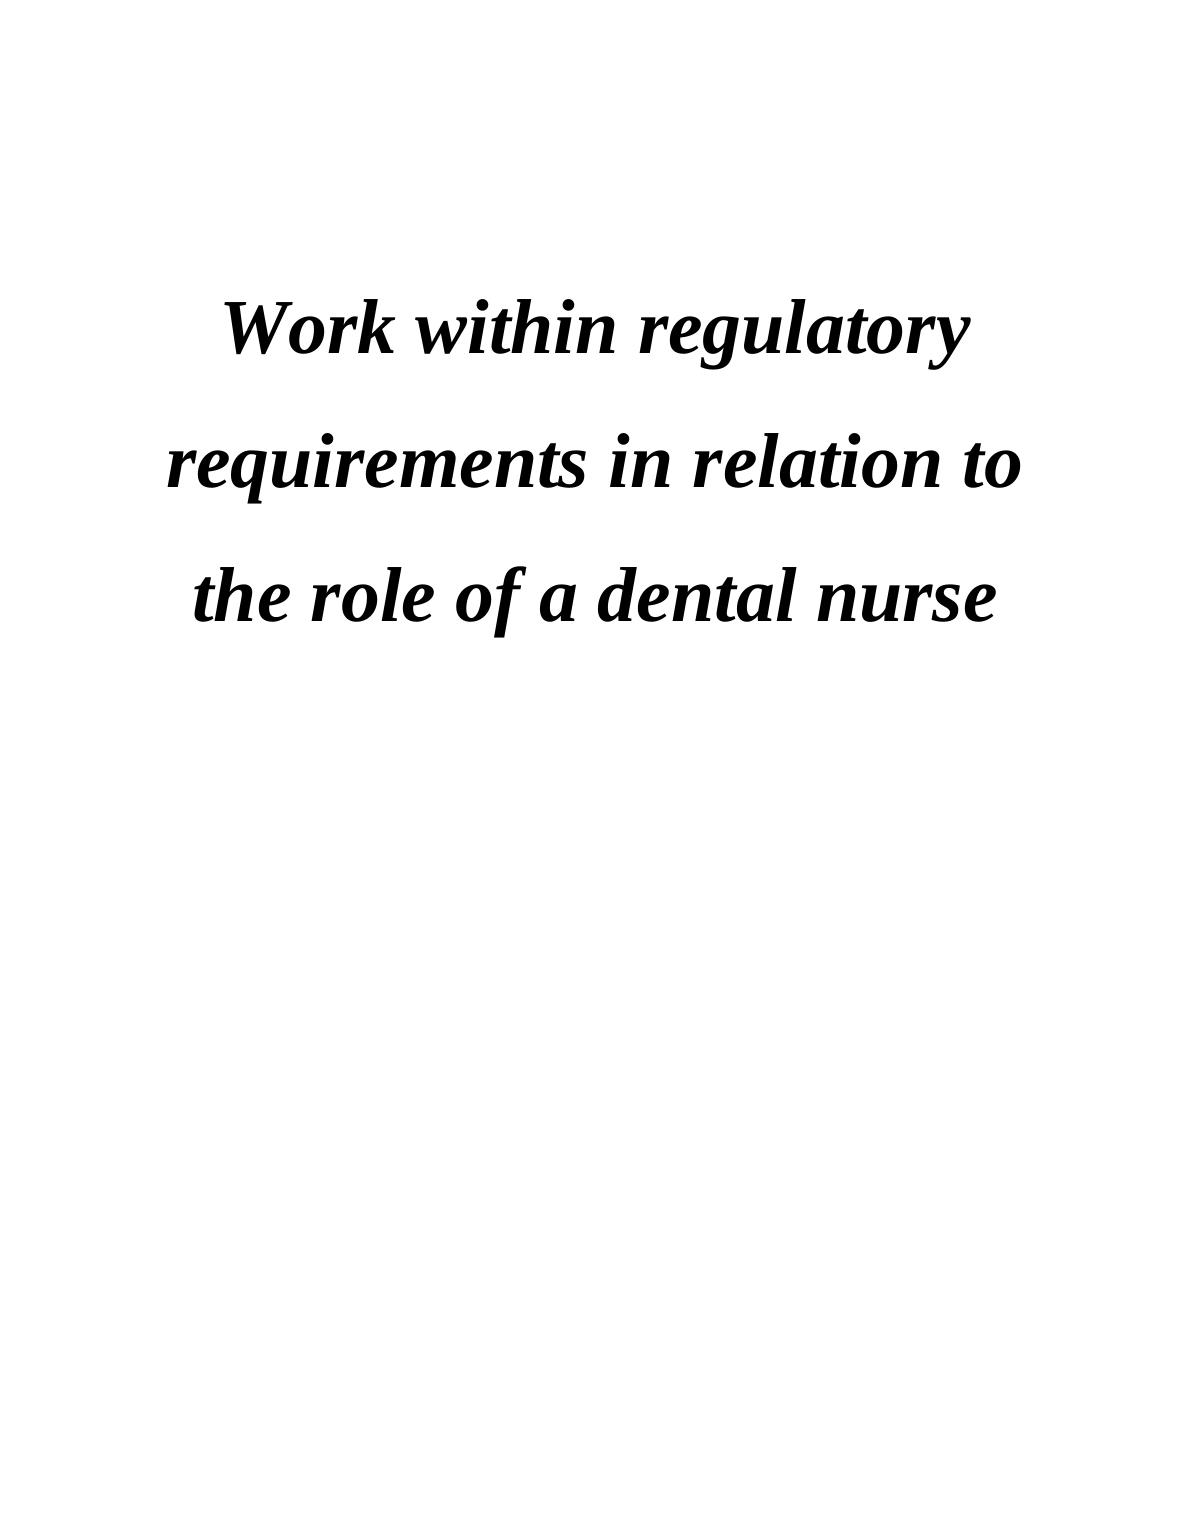 Legal Laws, Norms and Rules of Dental Nurse - Assignment_1